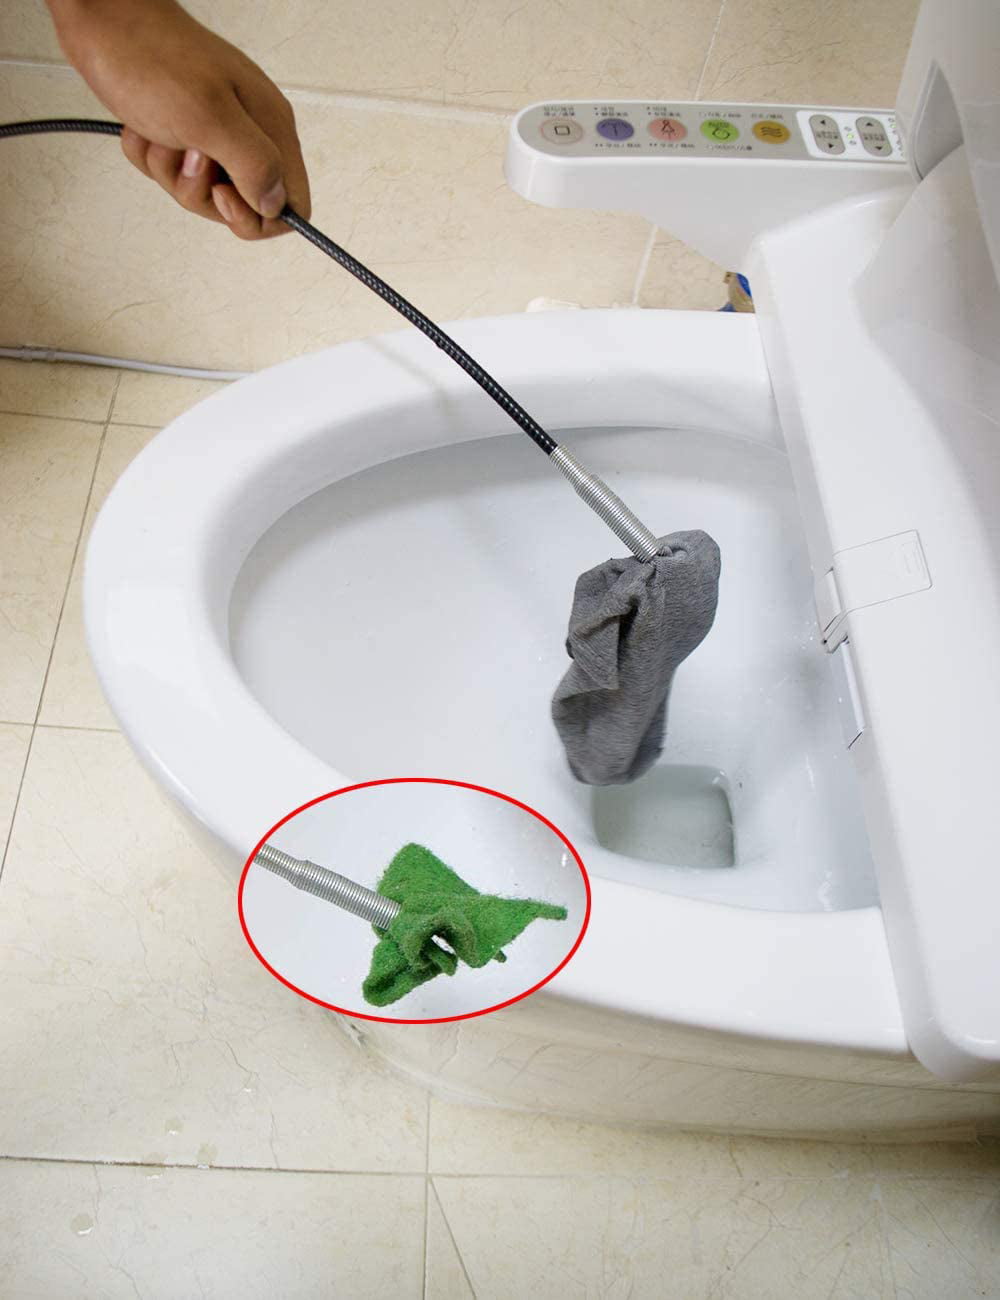 90cm/35.43 Inch Sink Drains Grabber Tool Flexible Long Reach Claw Pick Up  Narrow Bend Curve Floor Drain Sewer Spring Grip Cleane